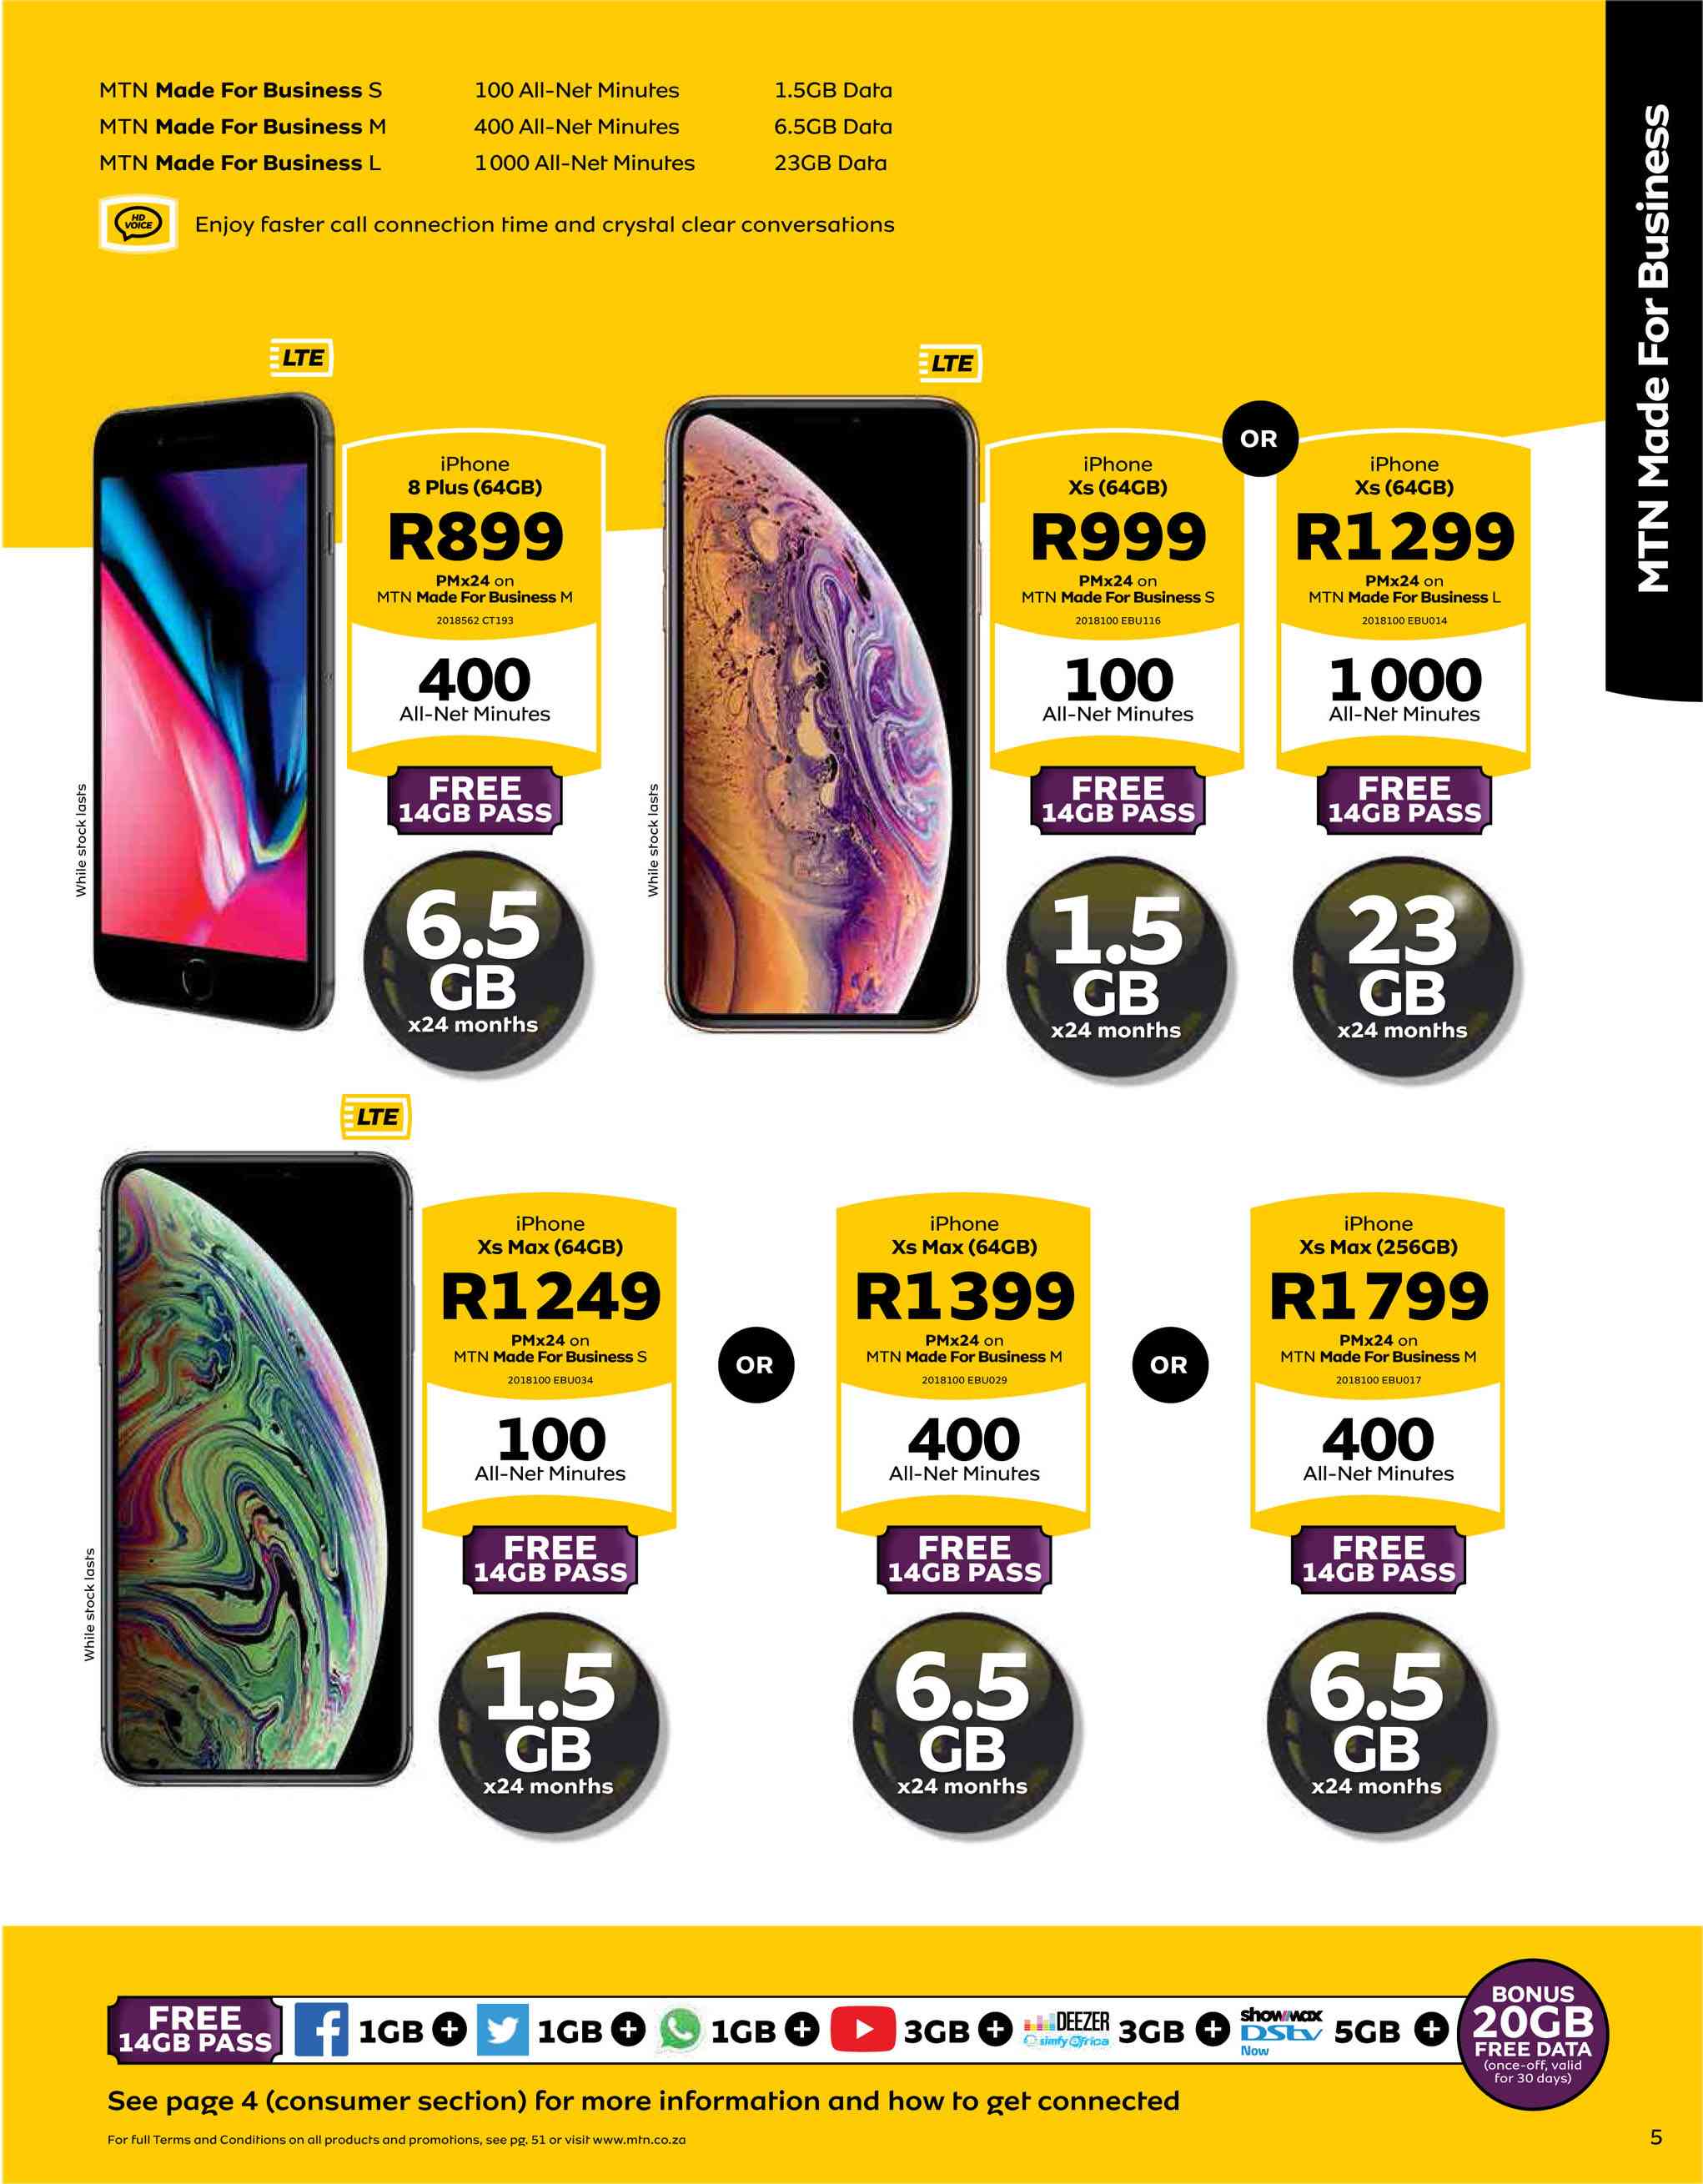 Special Apple iPhone Xs max (256GB)On MTN Made For Business M — www